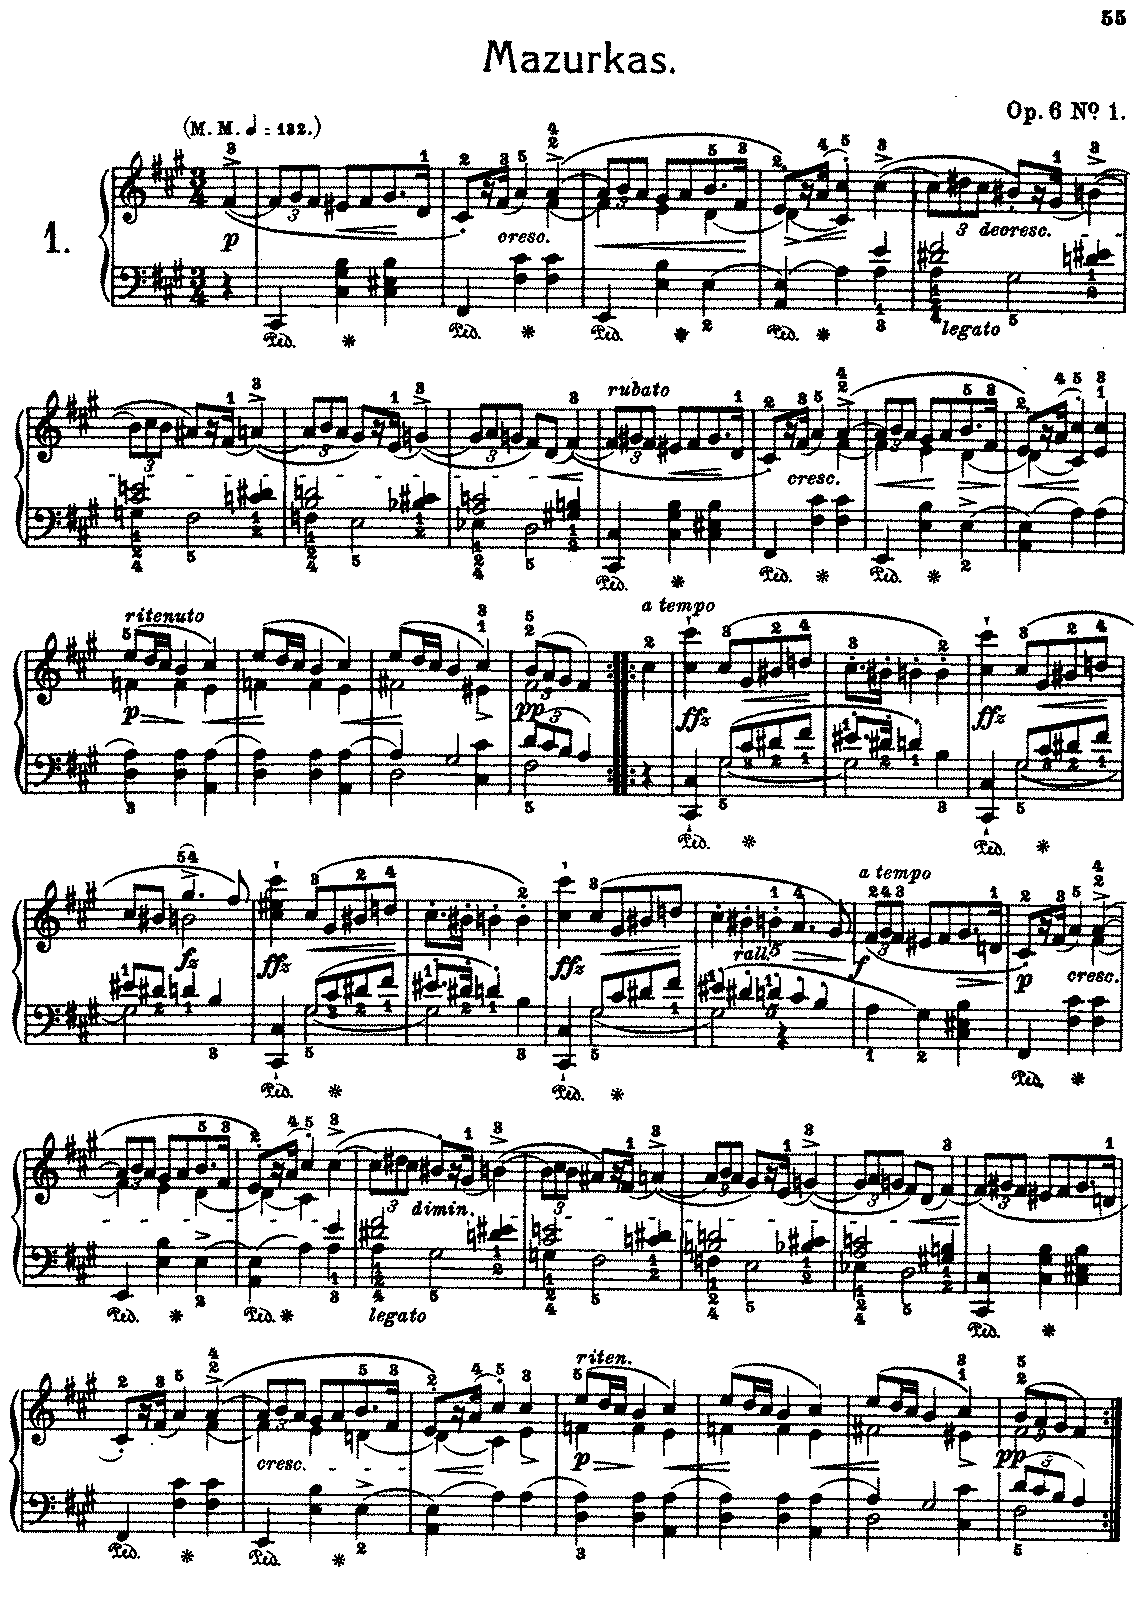 chopin compositions